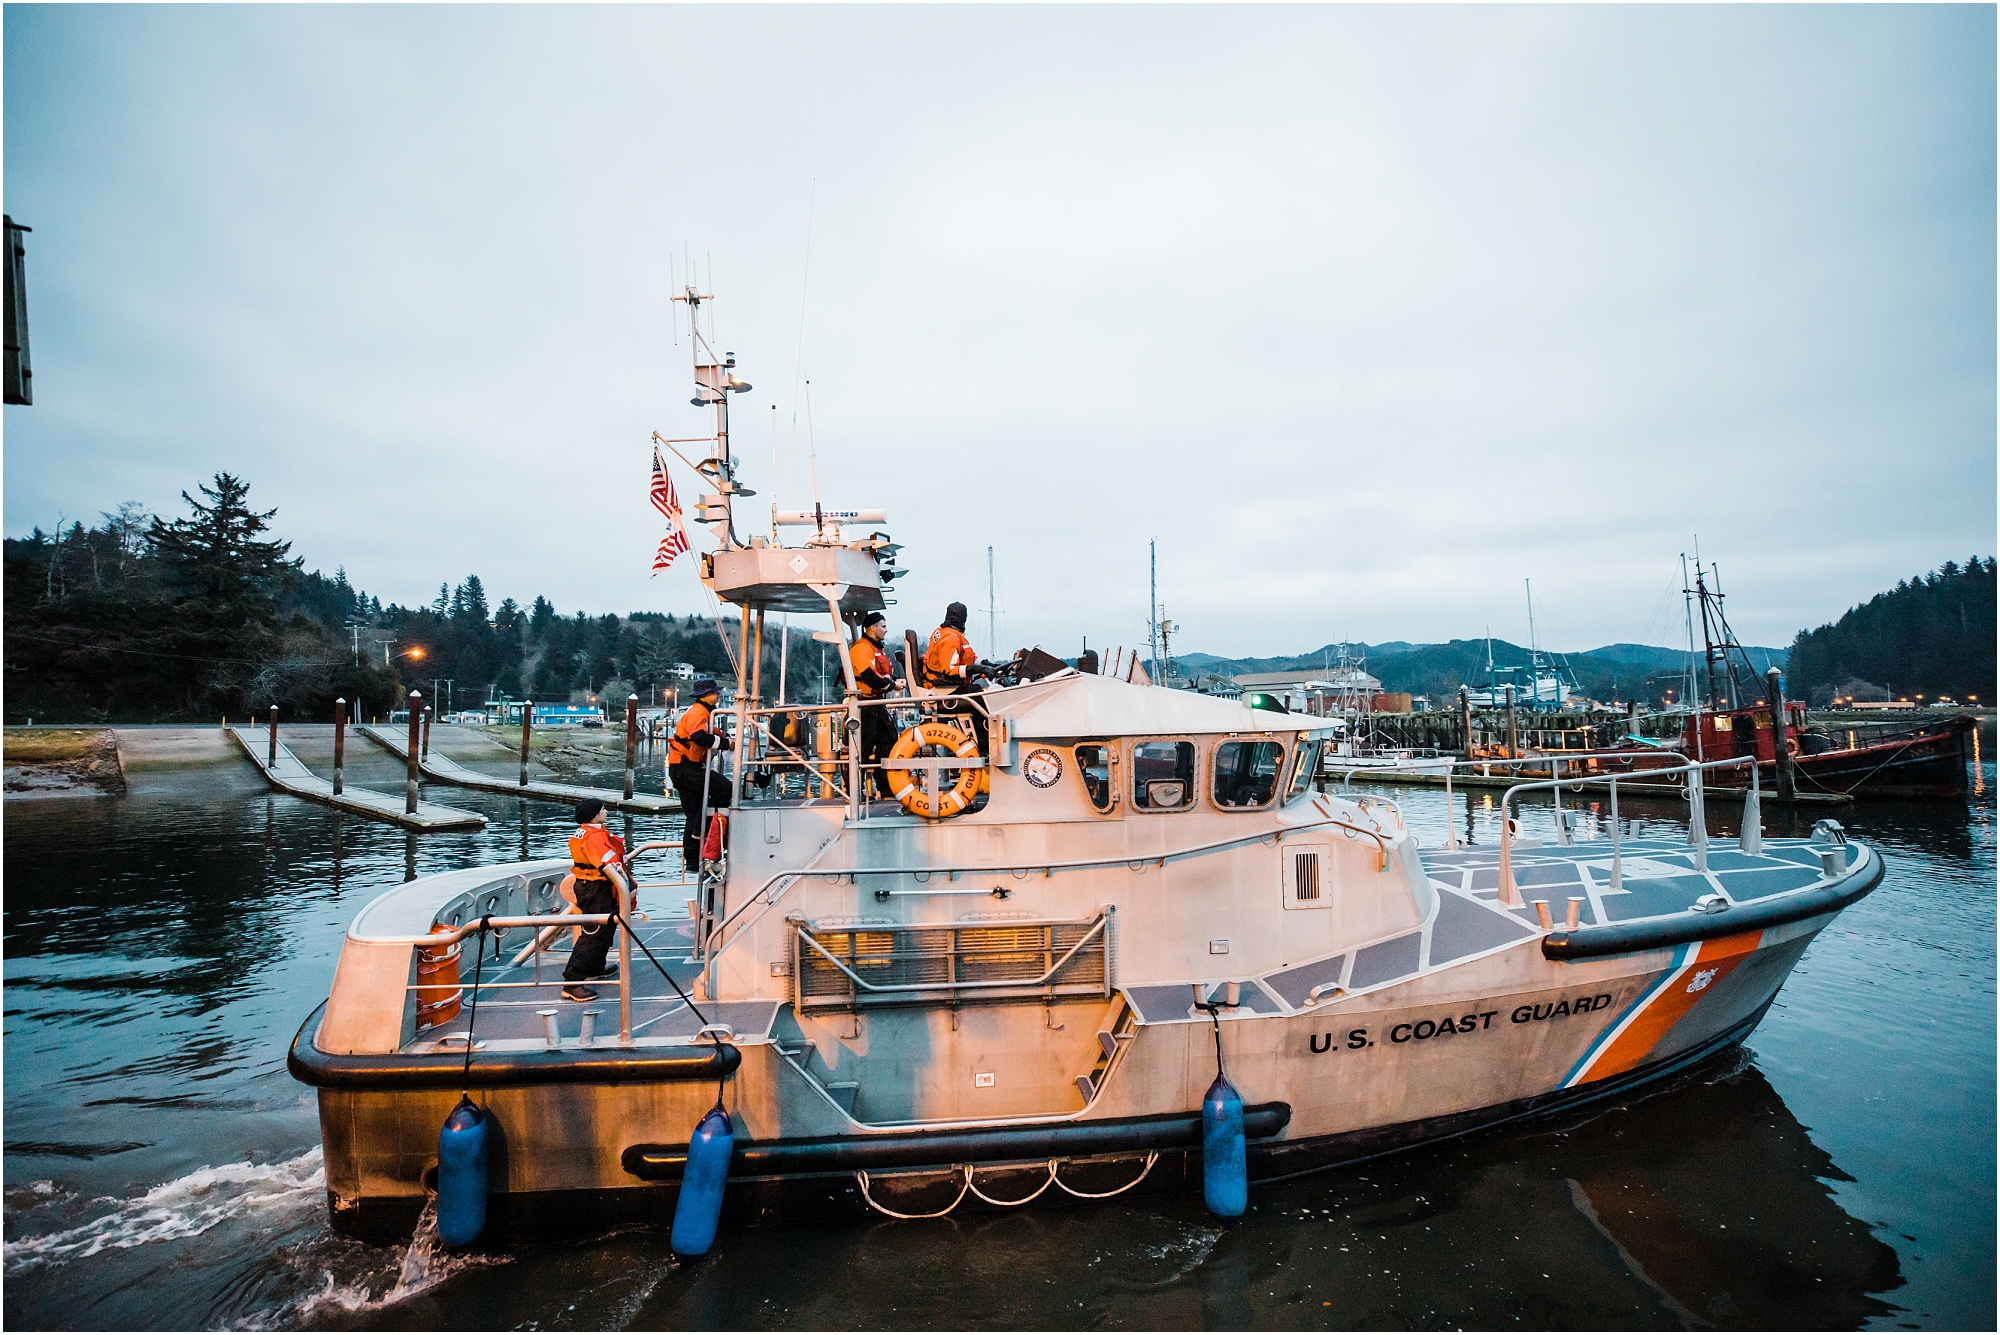 The crew of the US Coast Guard ship serve as witnesses for this Oregon Coast adventure elopement! | Erica Swantek Photography